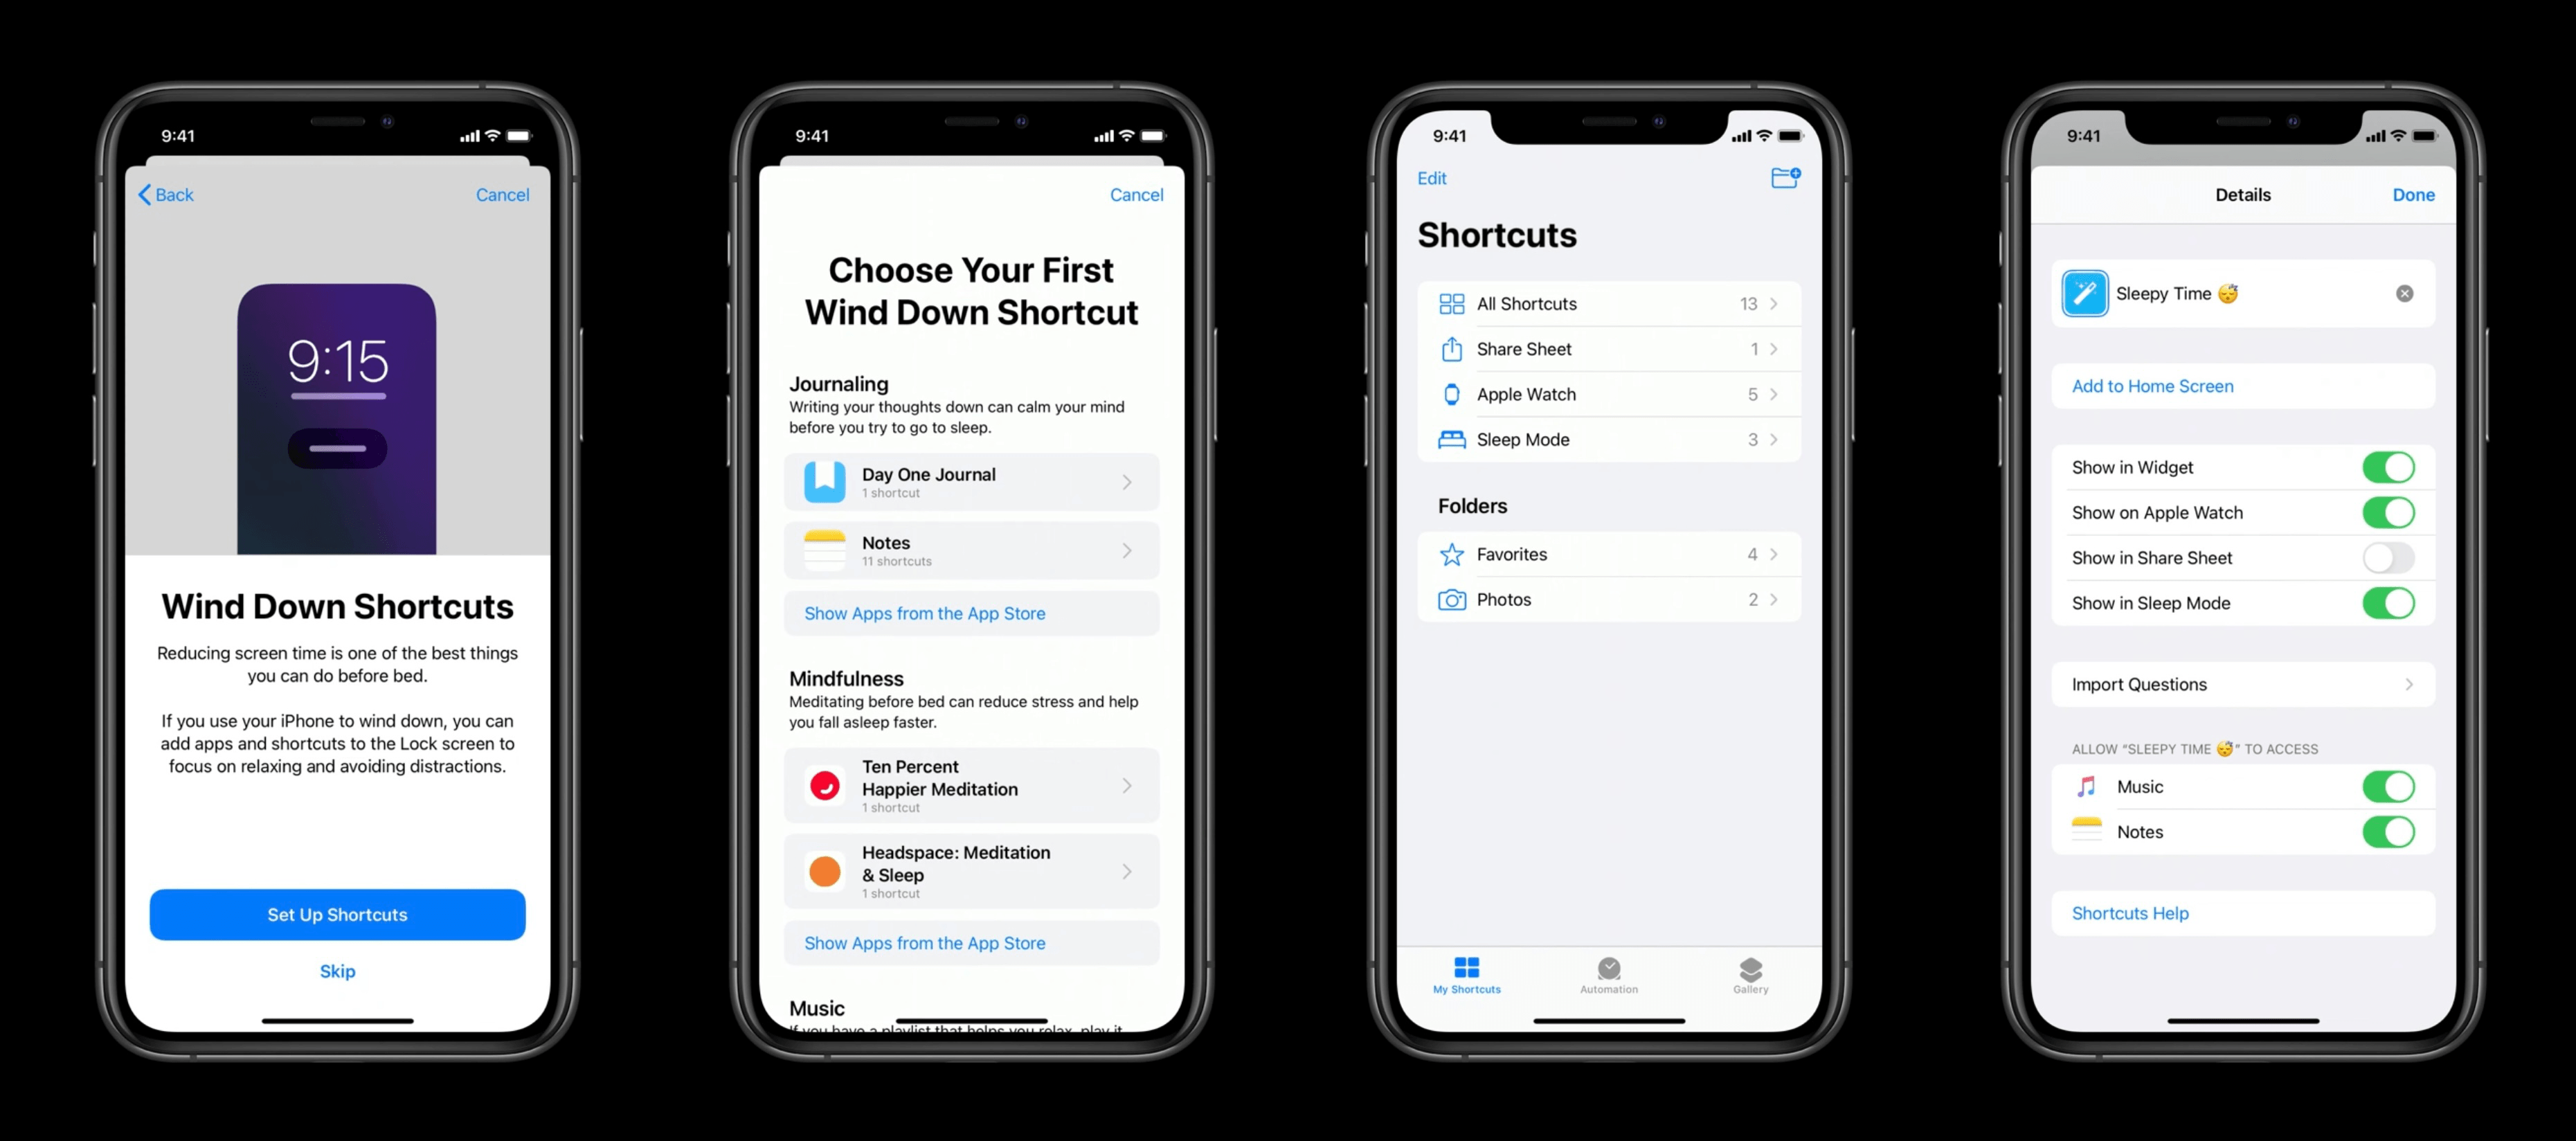 Wind Down setup (left) and configuring Wind Down shortcuts in the Shortcuts app (right).